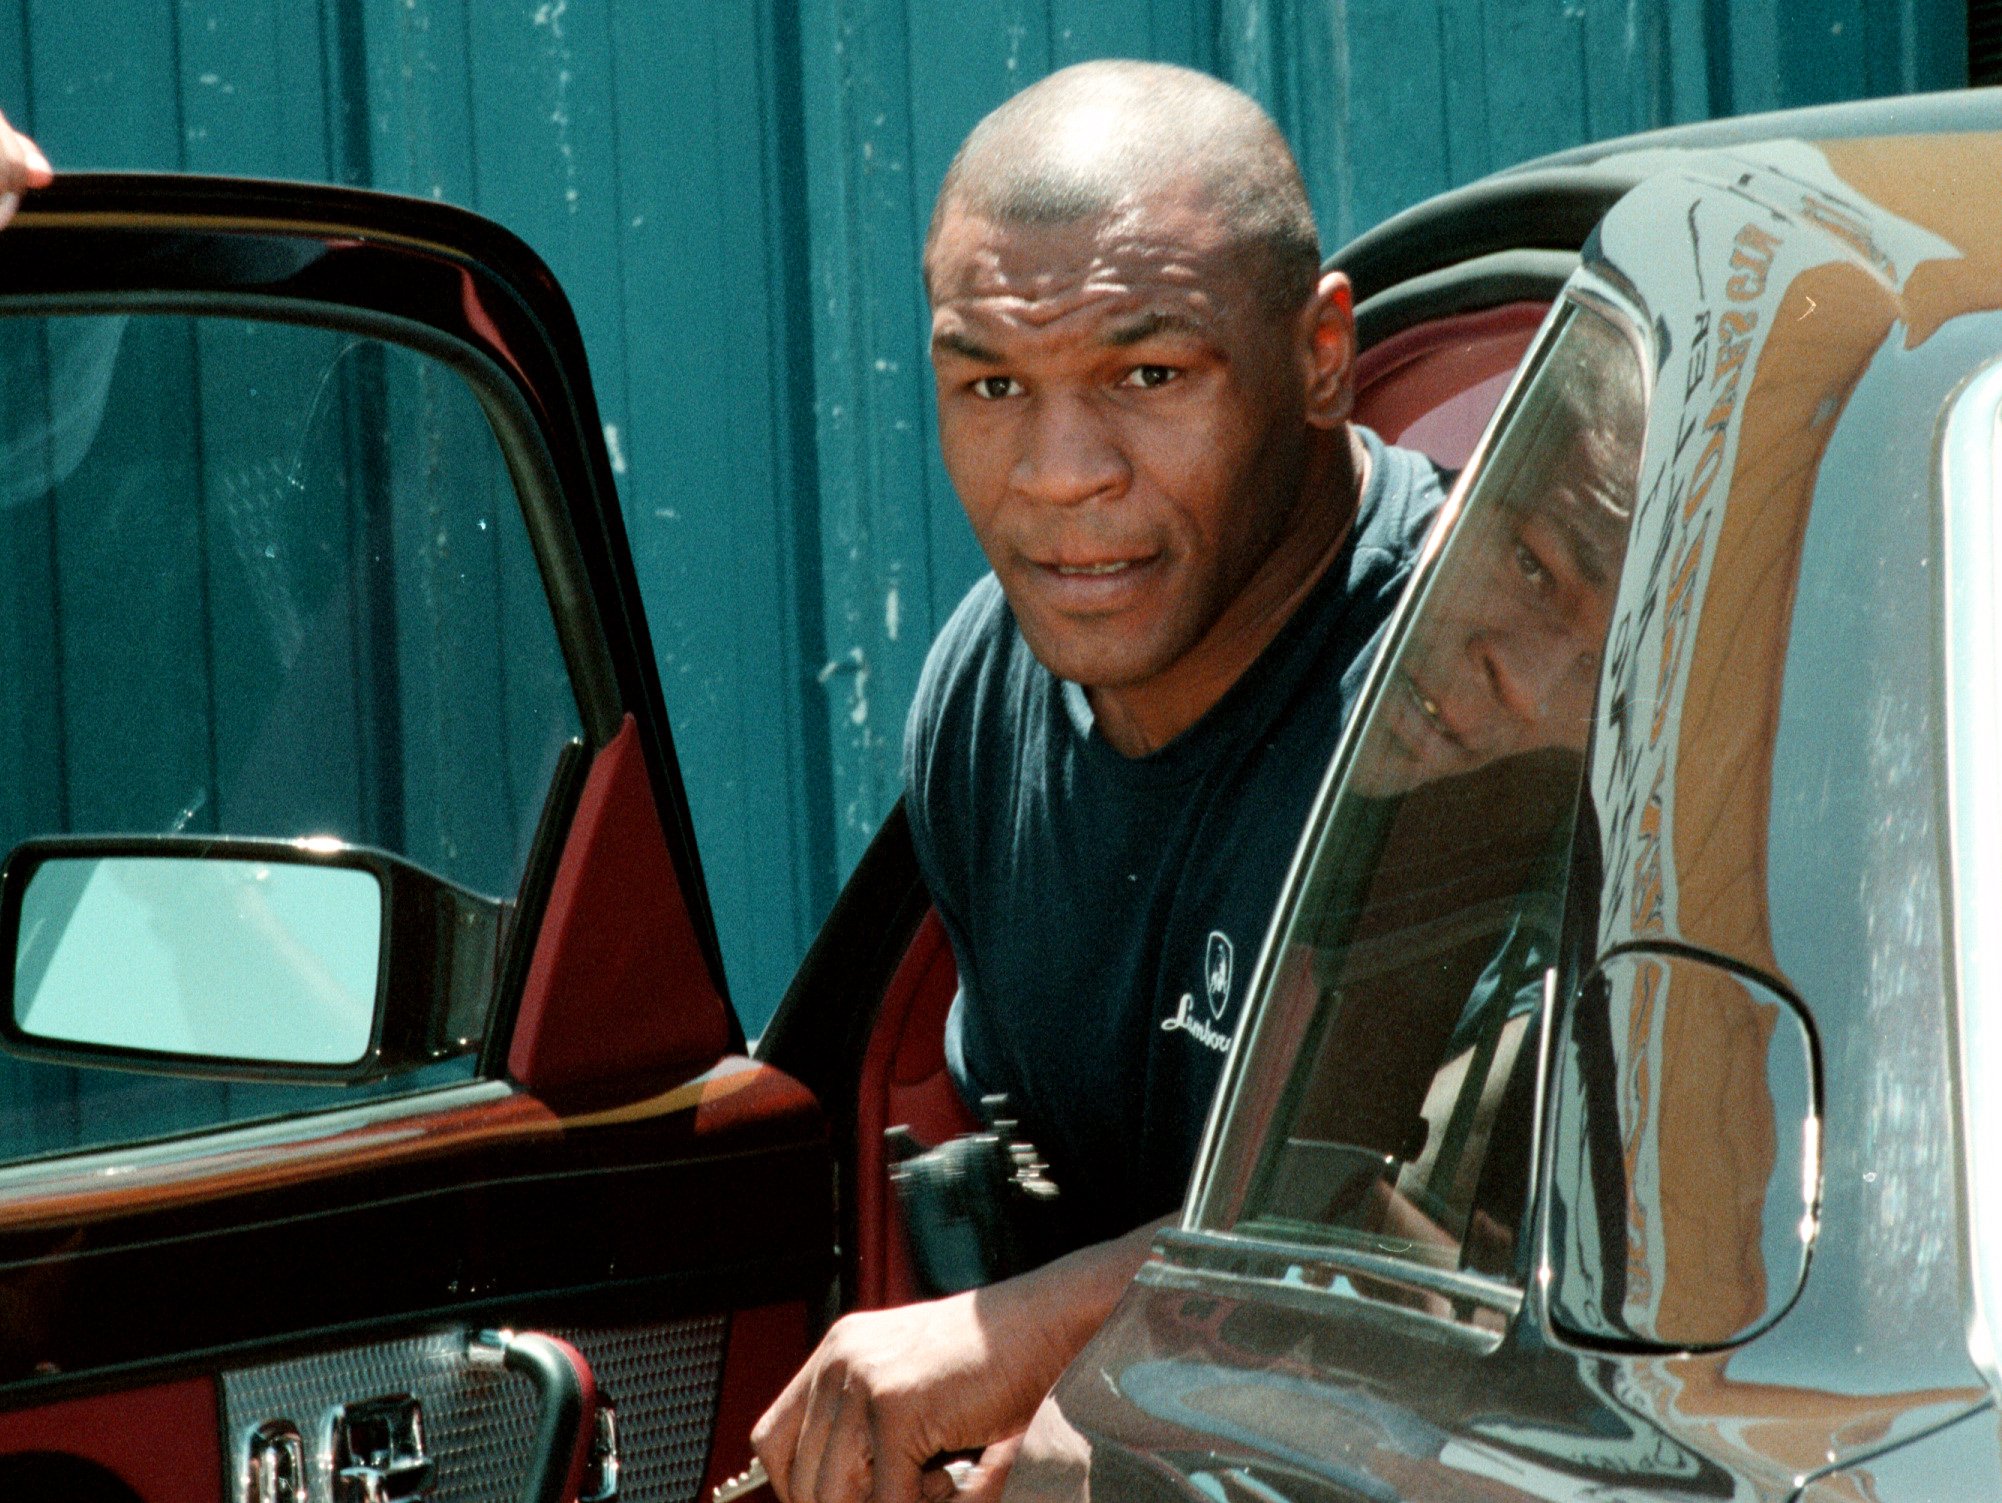 bao mike tyson was surprised when the rock gave him a super rare ford thunderbird when he accepted the challenge with the rock fortunately that didn t happen 6533a771829d3 Mike Tyson Was Surprised When The Rock Gave Him A Super Rare 1956 Ford Thunderbird When He Accepted The Challenge With The Rock, Fortunately That Didn't Happen.